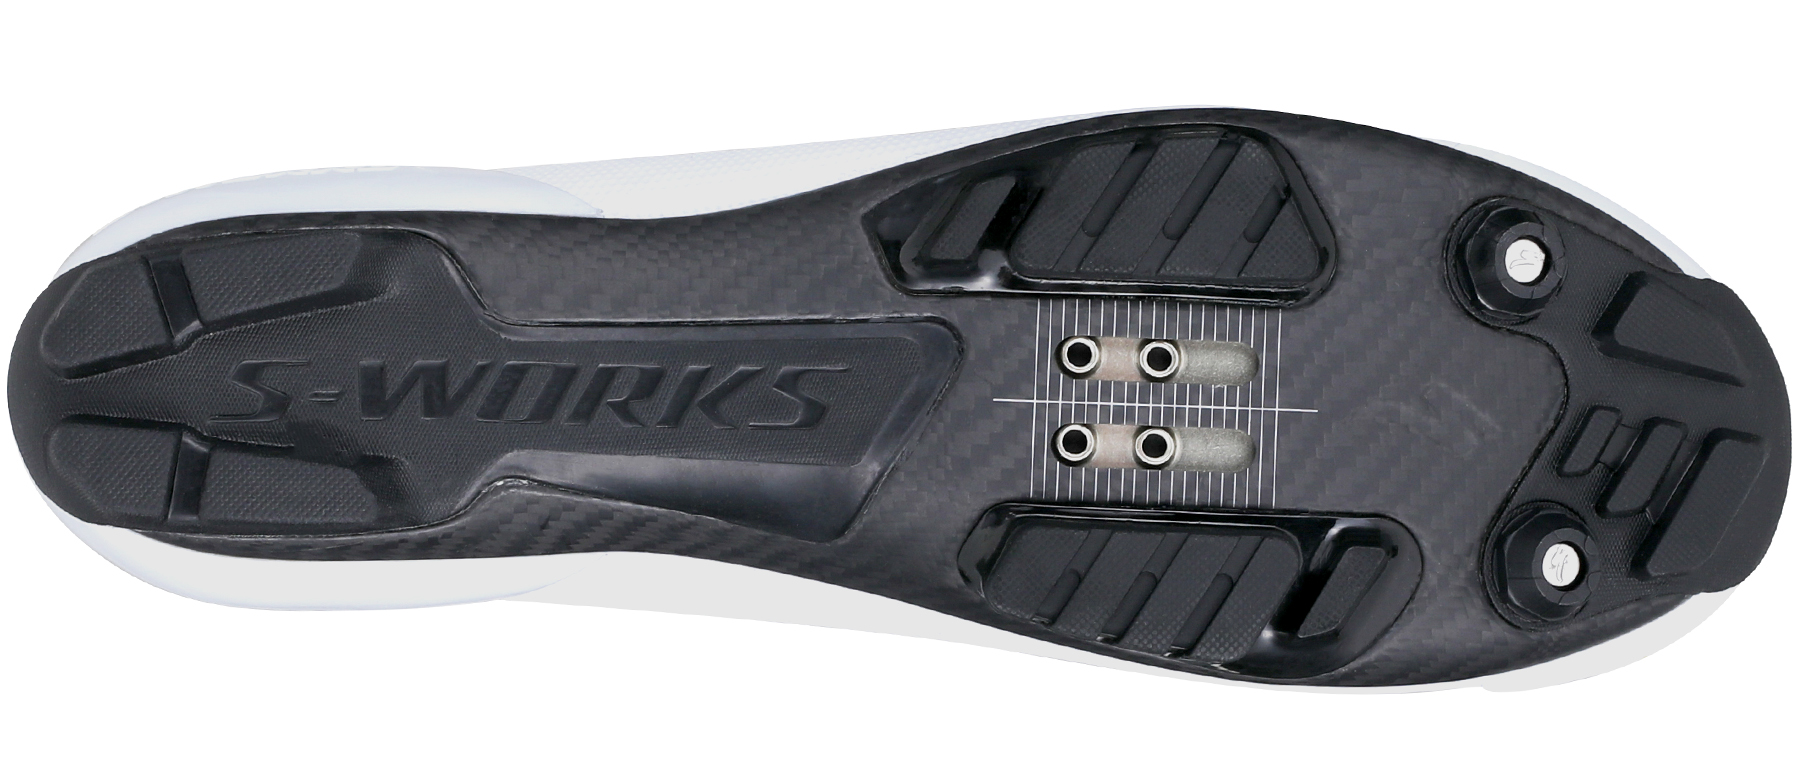 Specialized S-Works Recon Lace Gravel Shoe